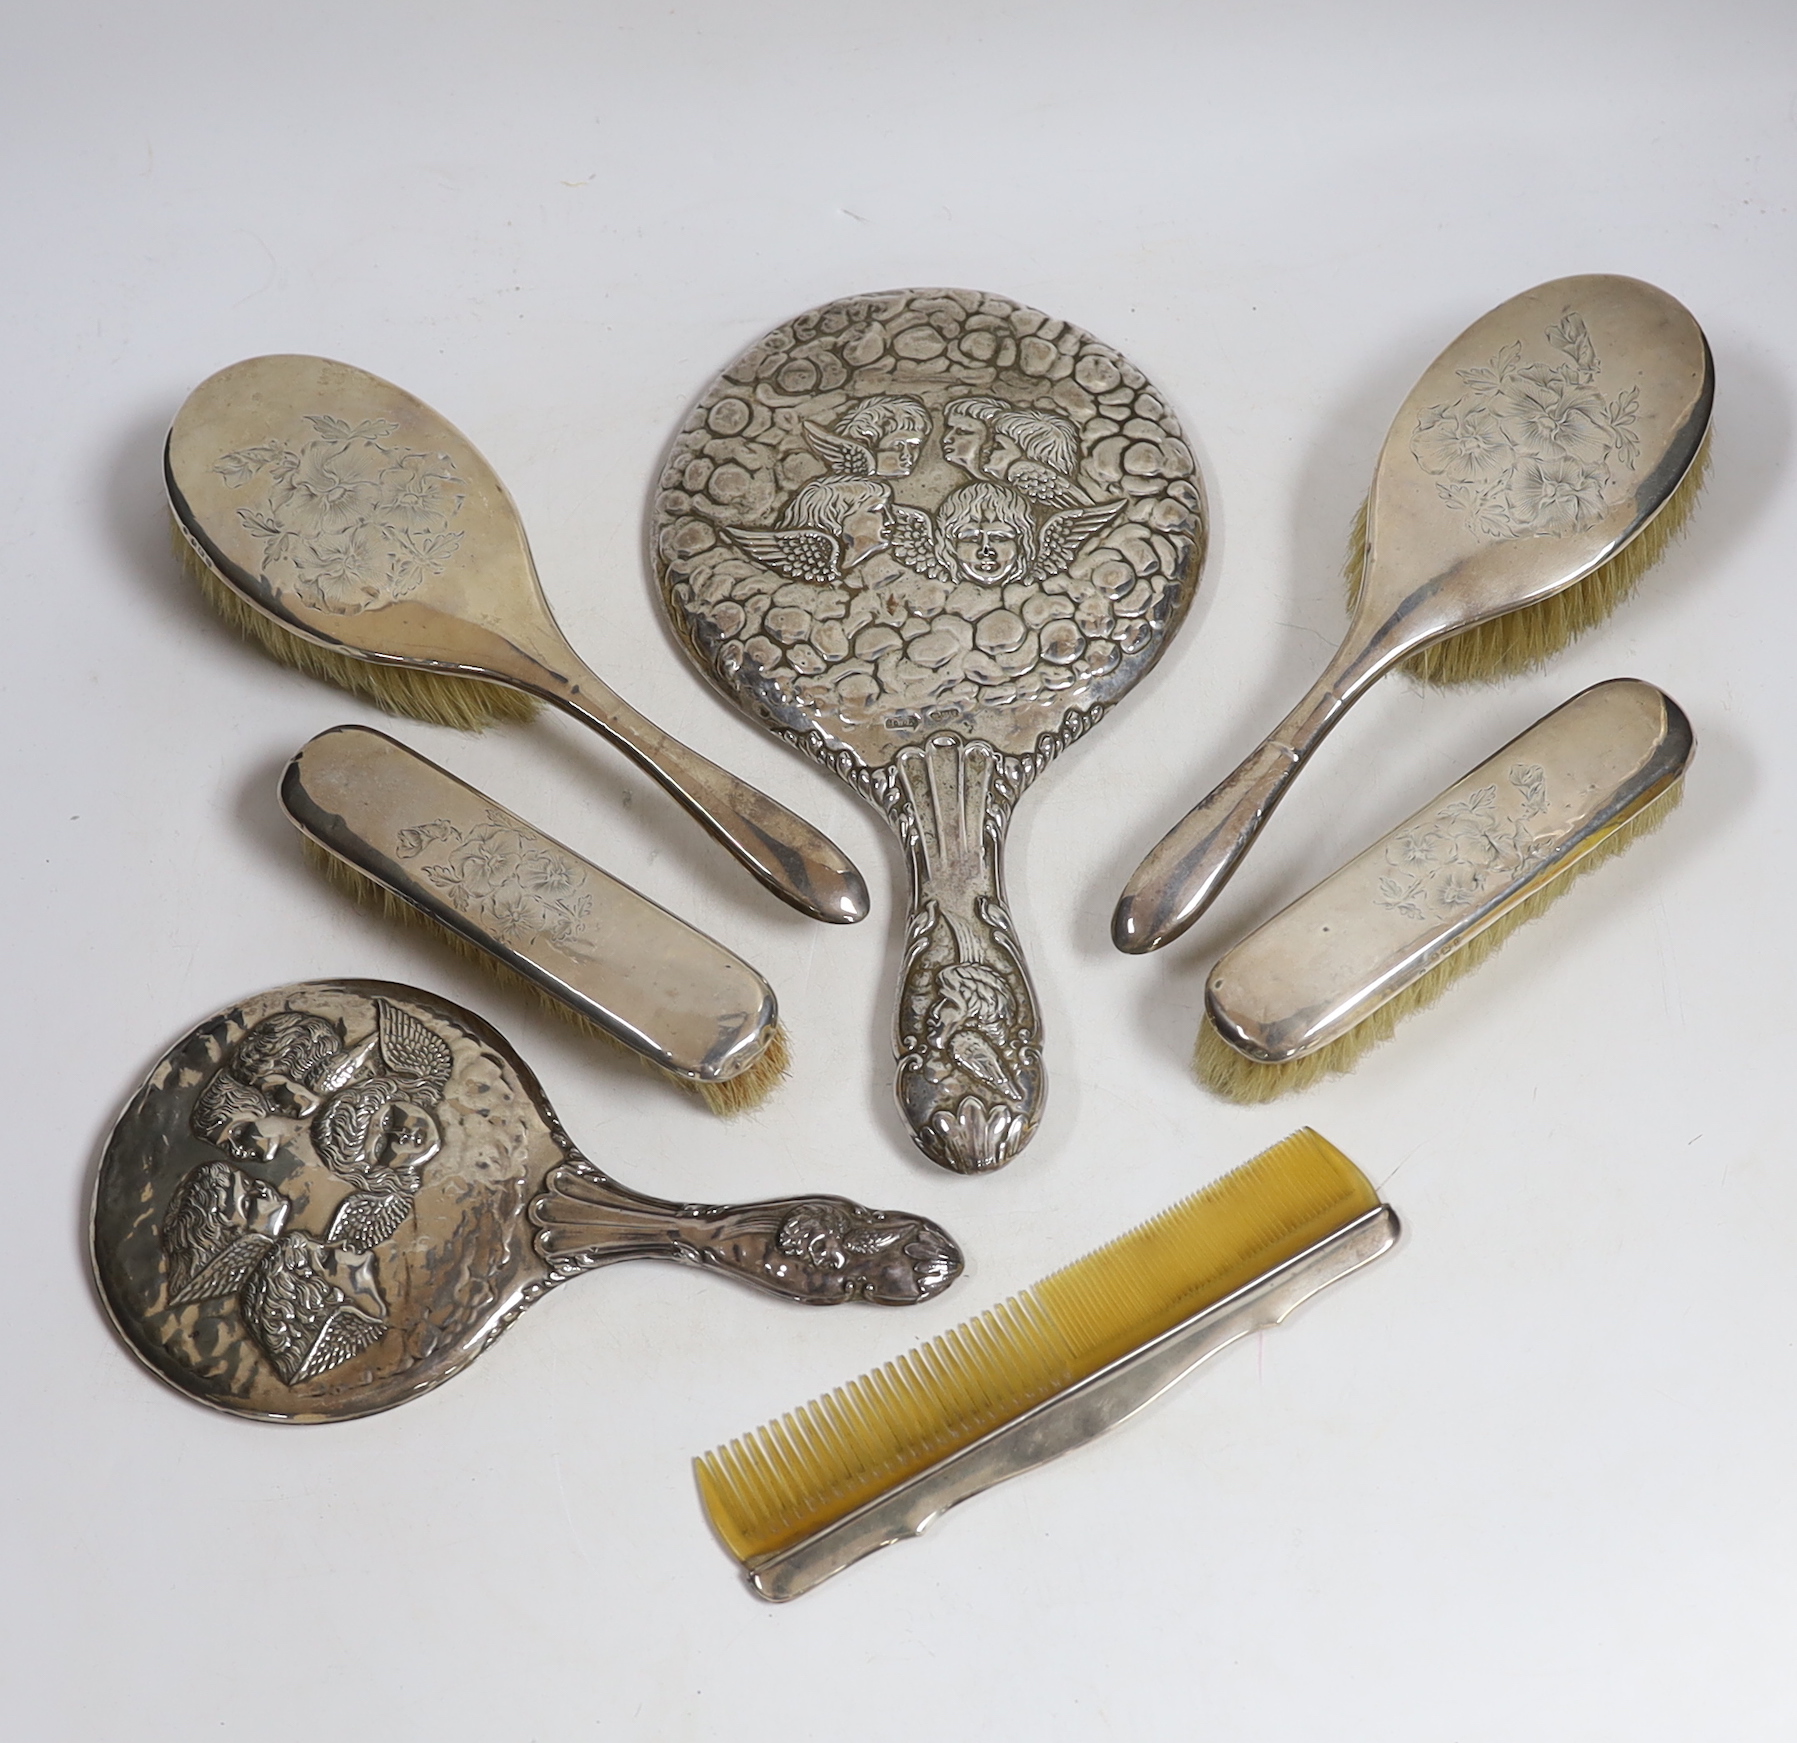 Two early 20th century repousse silver mounted hand mirrors with Reynold's Angels decoration, four silver mounted brushes and a comb.